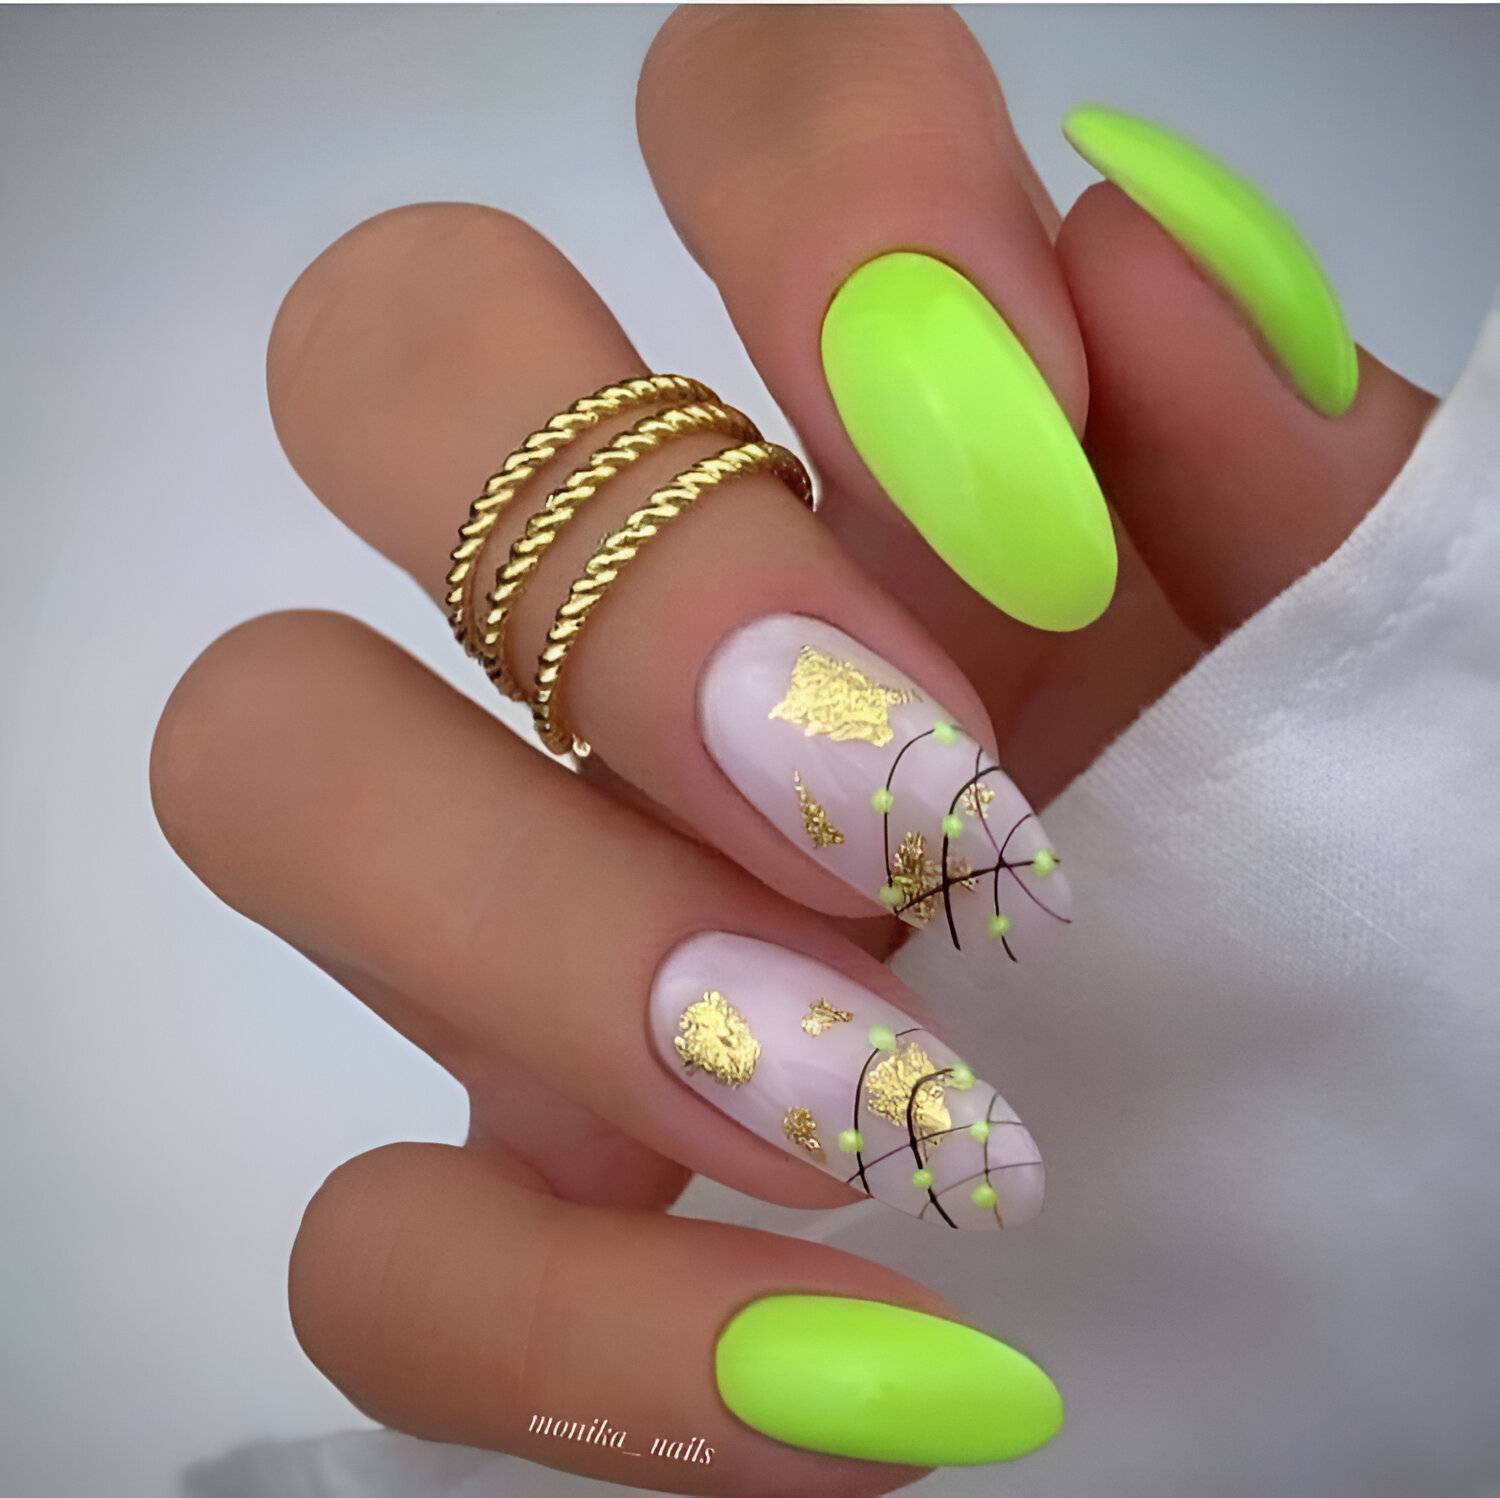 30 Colorful Nail Art Designs To Have Fun And Stay Fabulous - 201